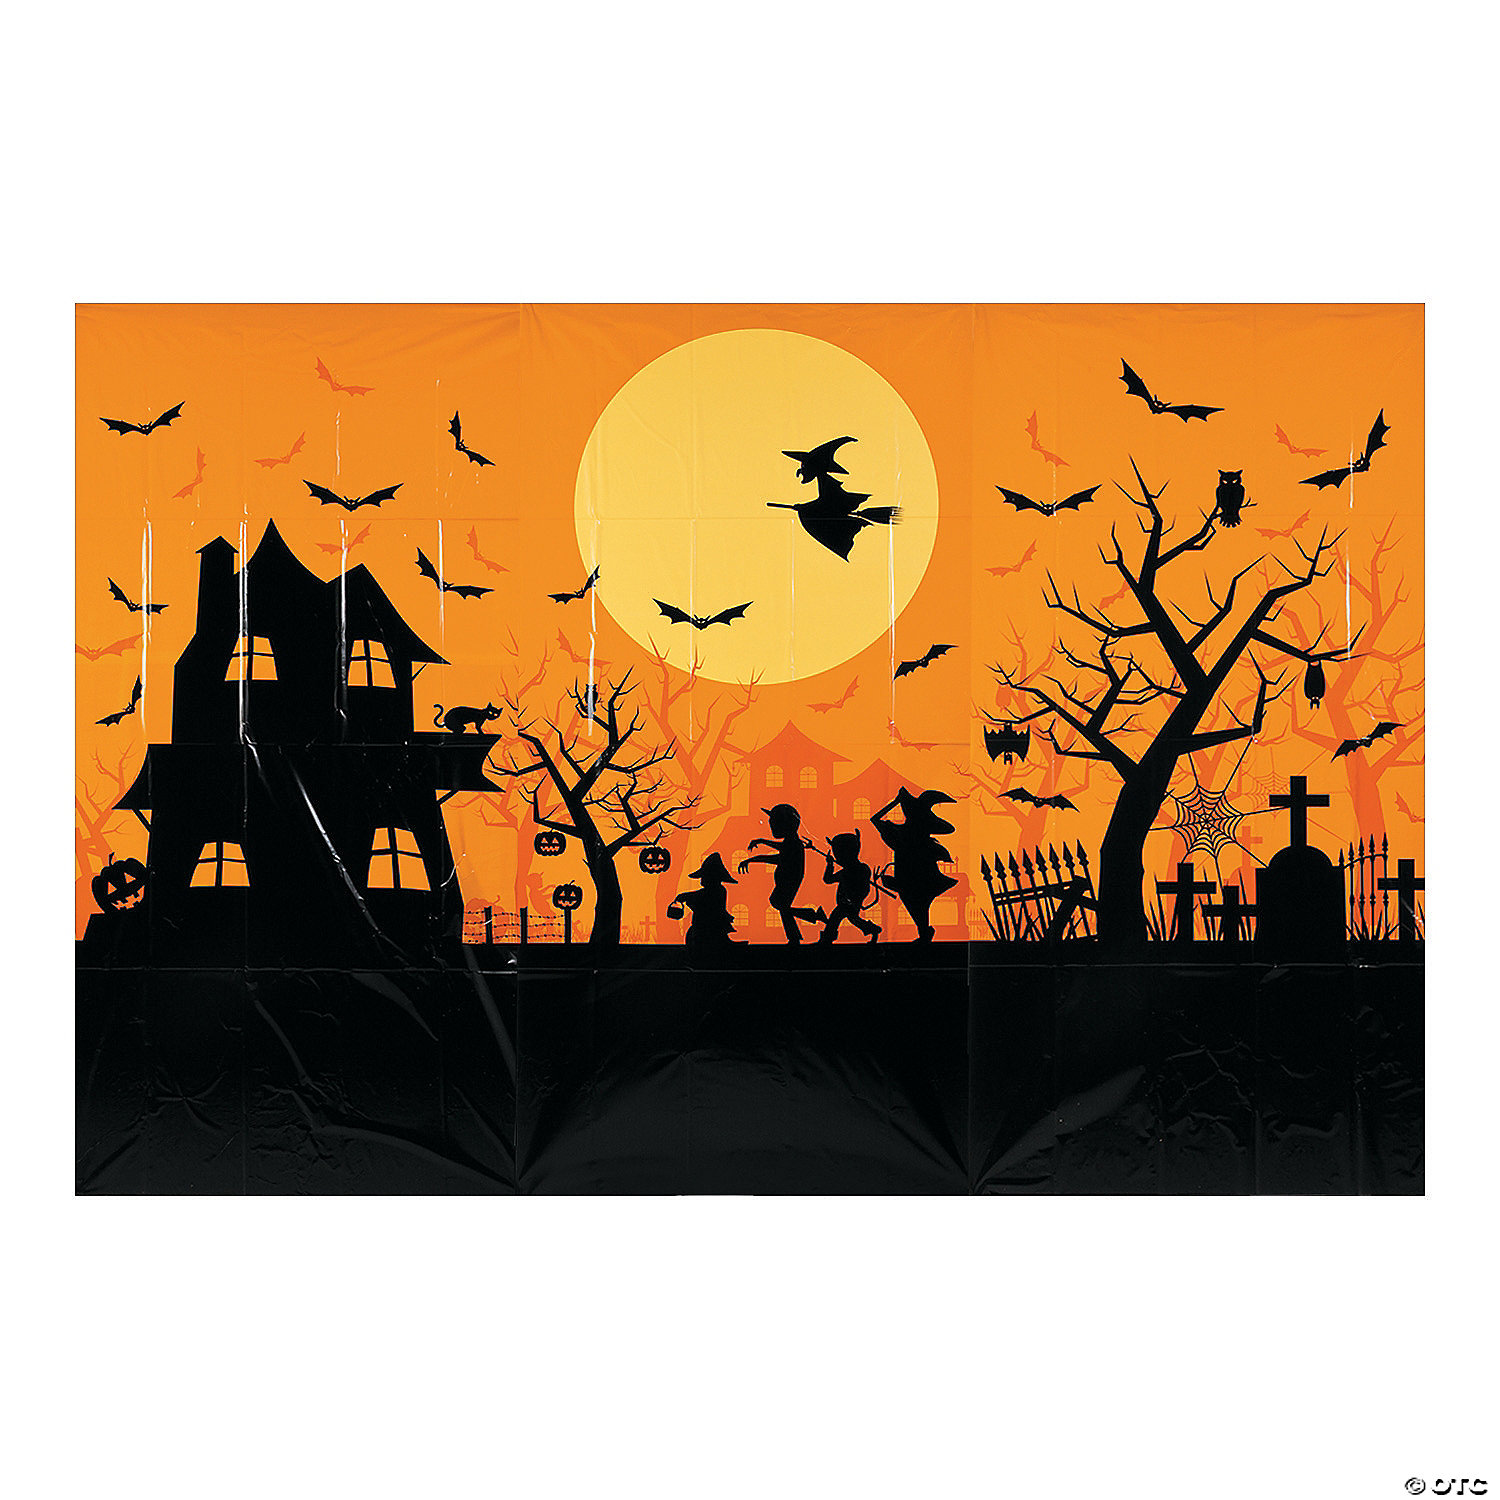 9x6ft Halloween Themed Trick or Treat Party Backdrop Hand Drawn Grimace Pumpkins Skull Bats Spider Web Tombstones Background Halloween Party Decorations Studio Photographic Backdrops 